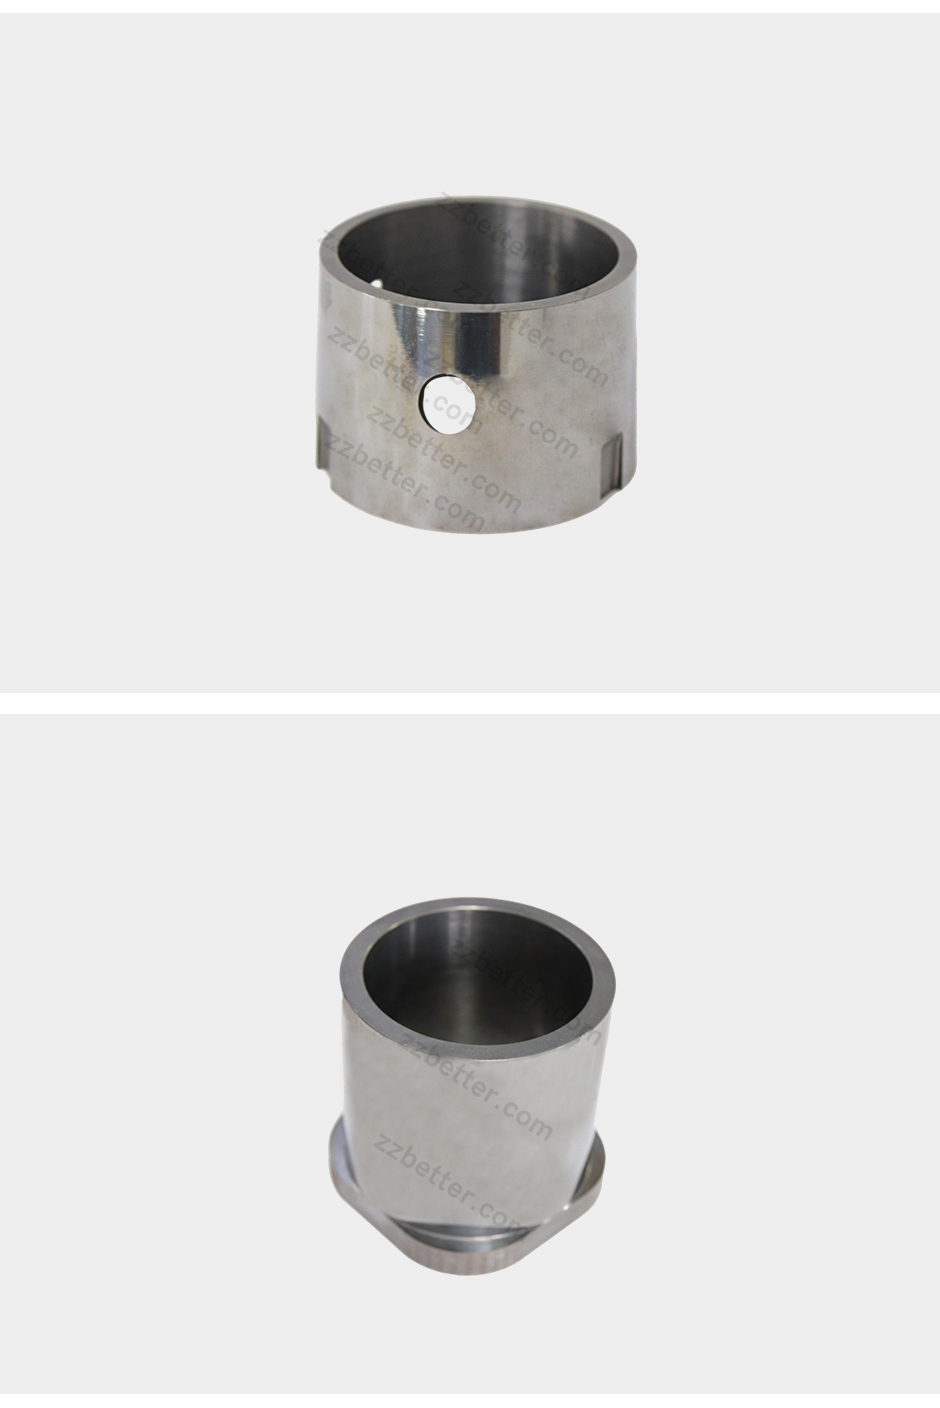 Carbide Wear Bush And Sleeve for Oil And Gas Field